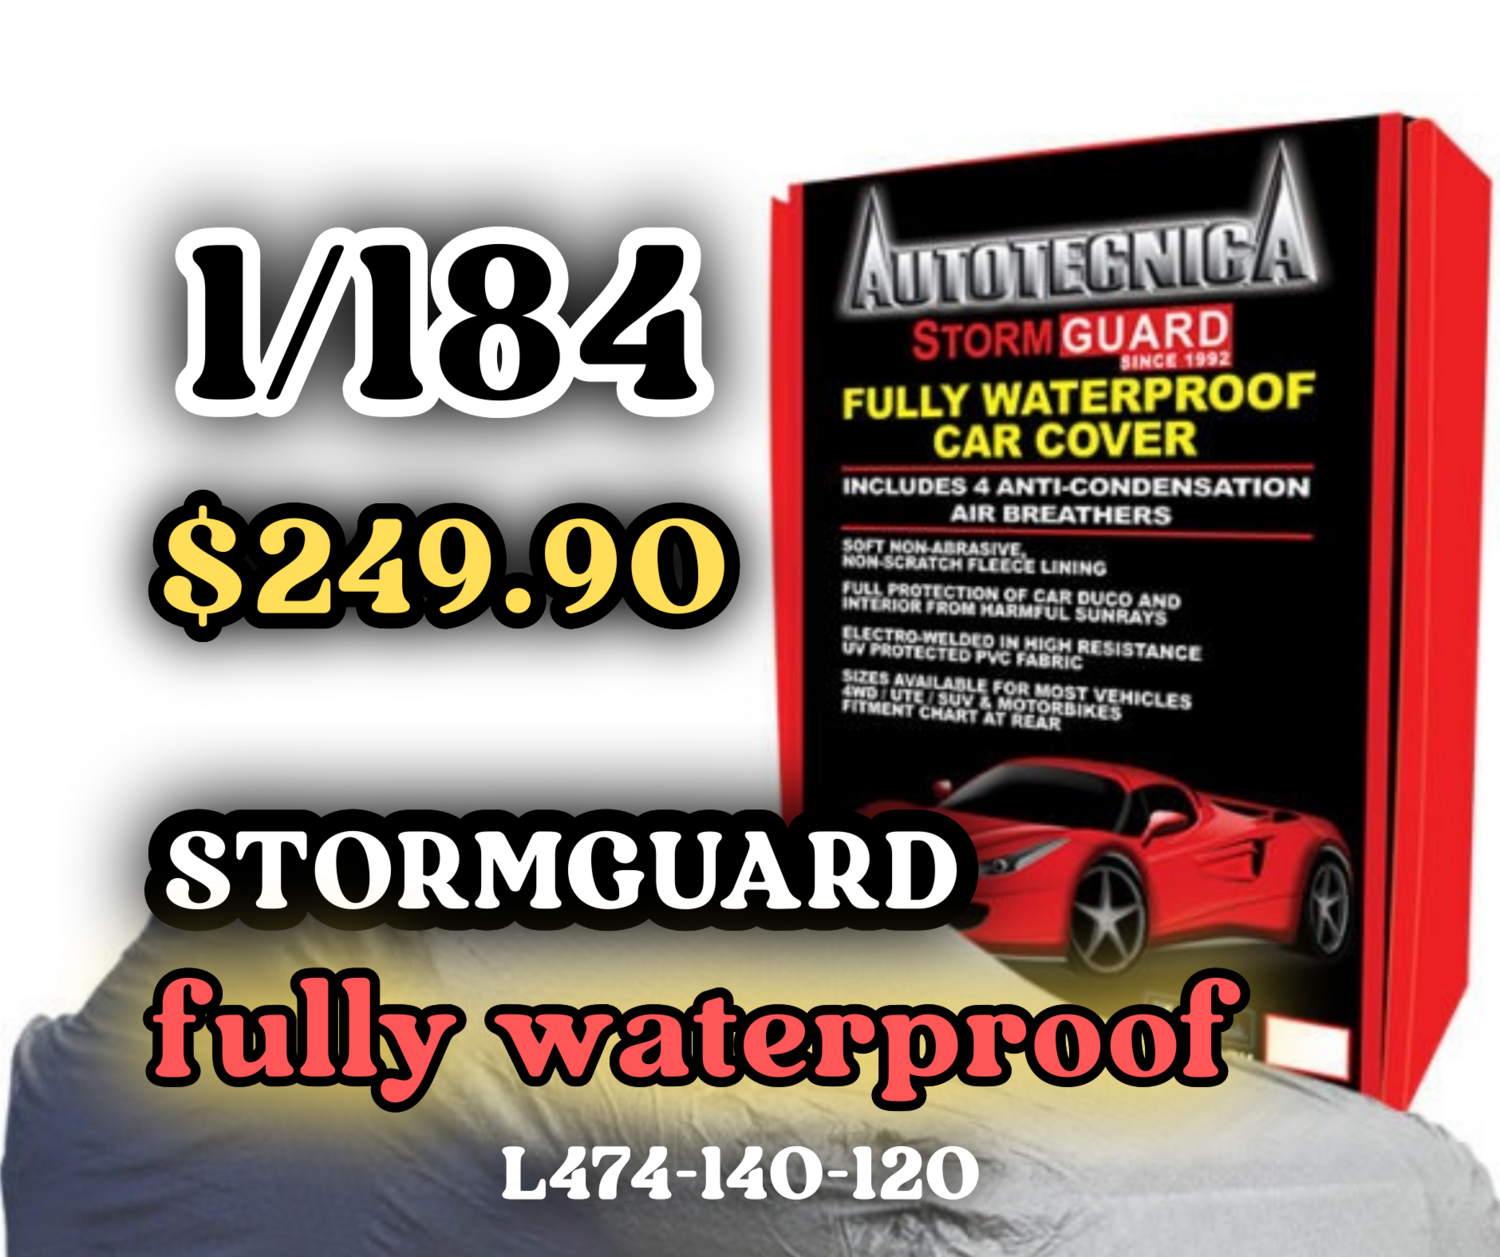 fully waterproof 1/184 Stormguard  Car Cover Large No1 free postage $249.99